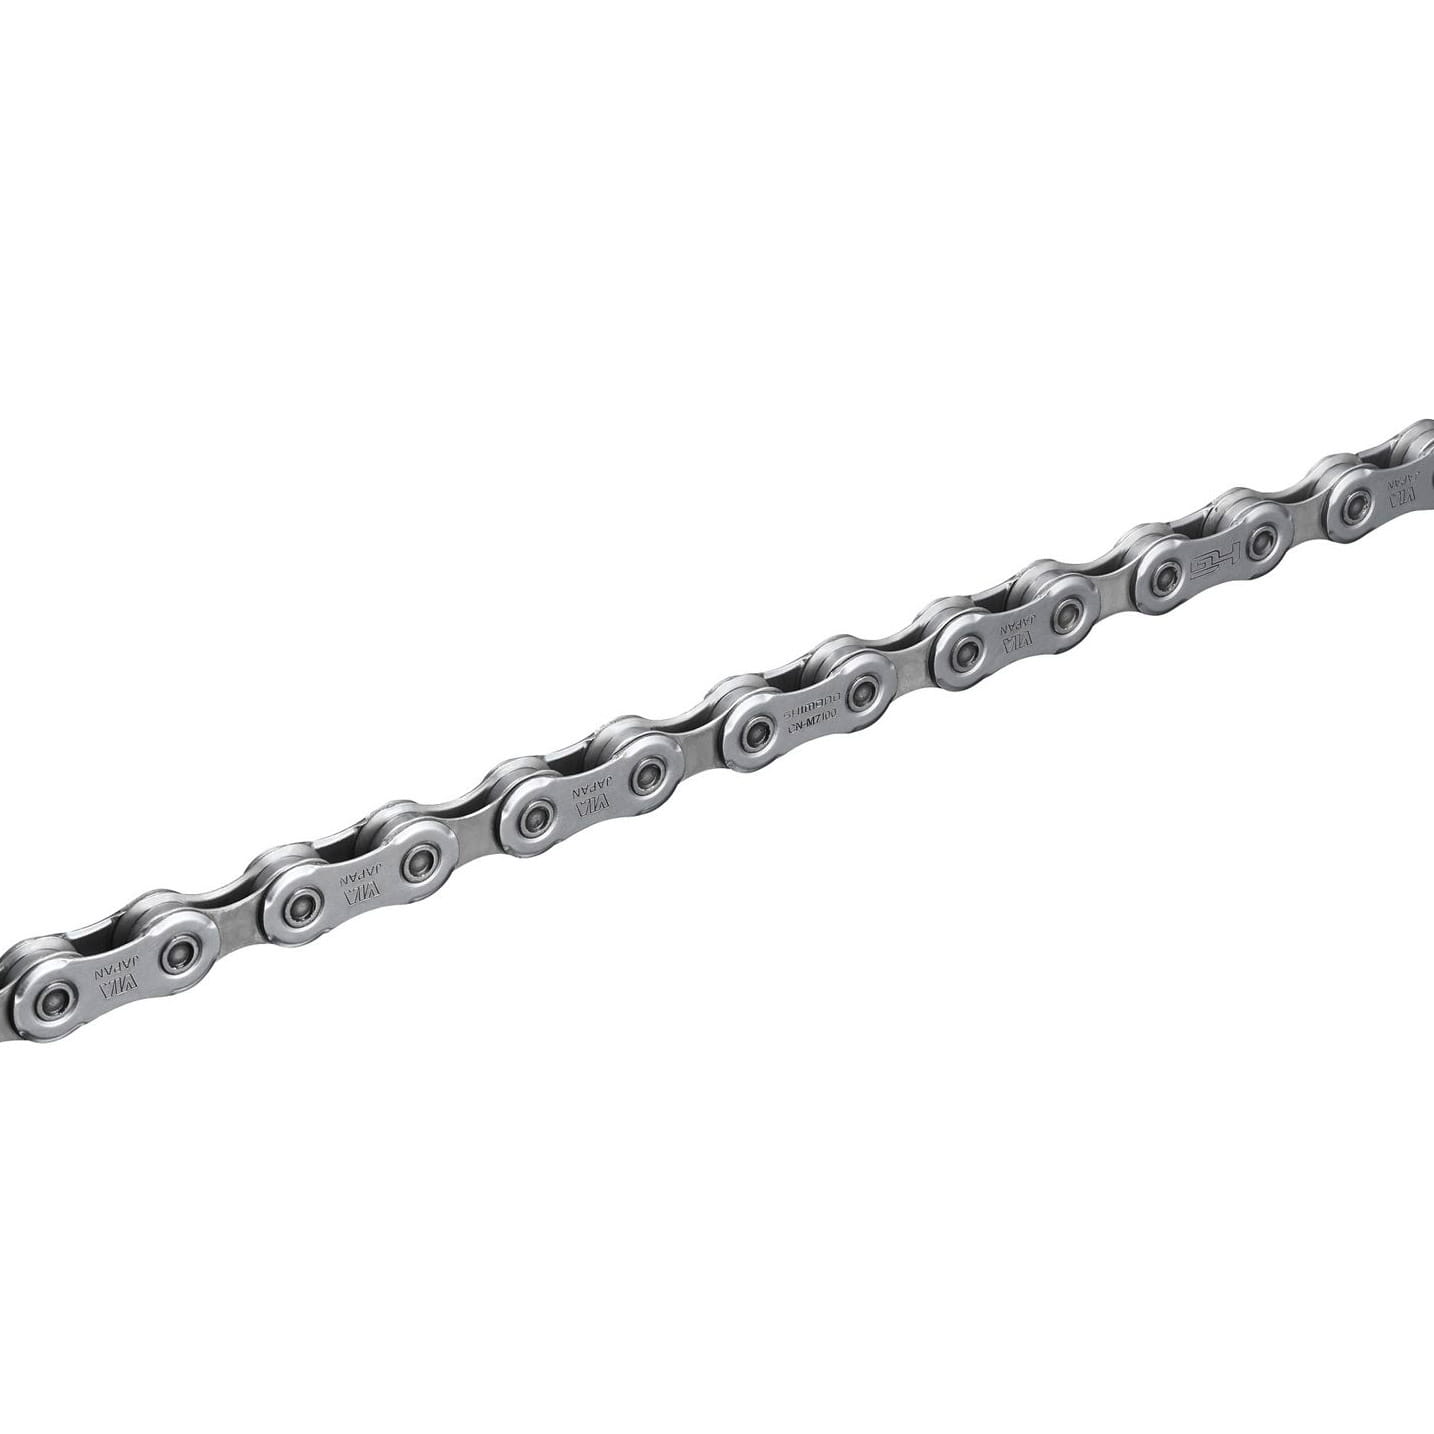 Shimano Chain CN-M7100 12-speed (SLX / E-Bike) with Quick-Link